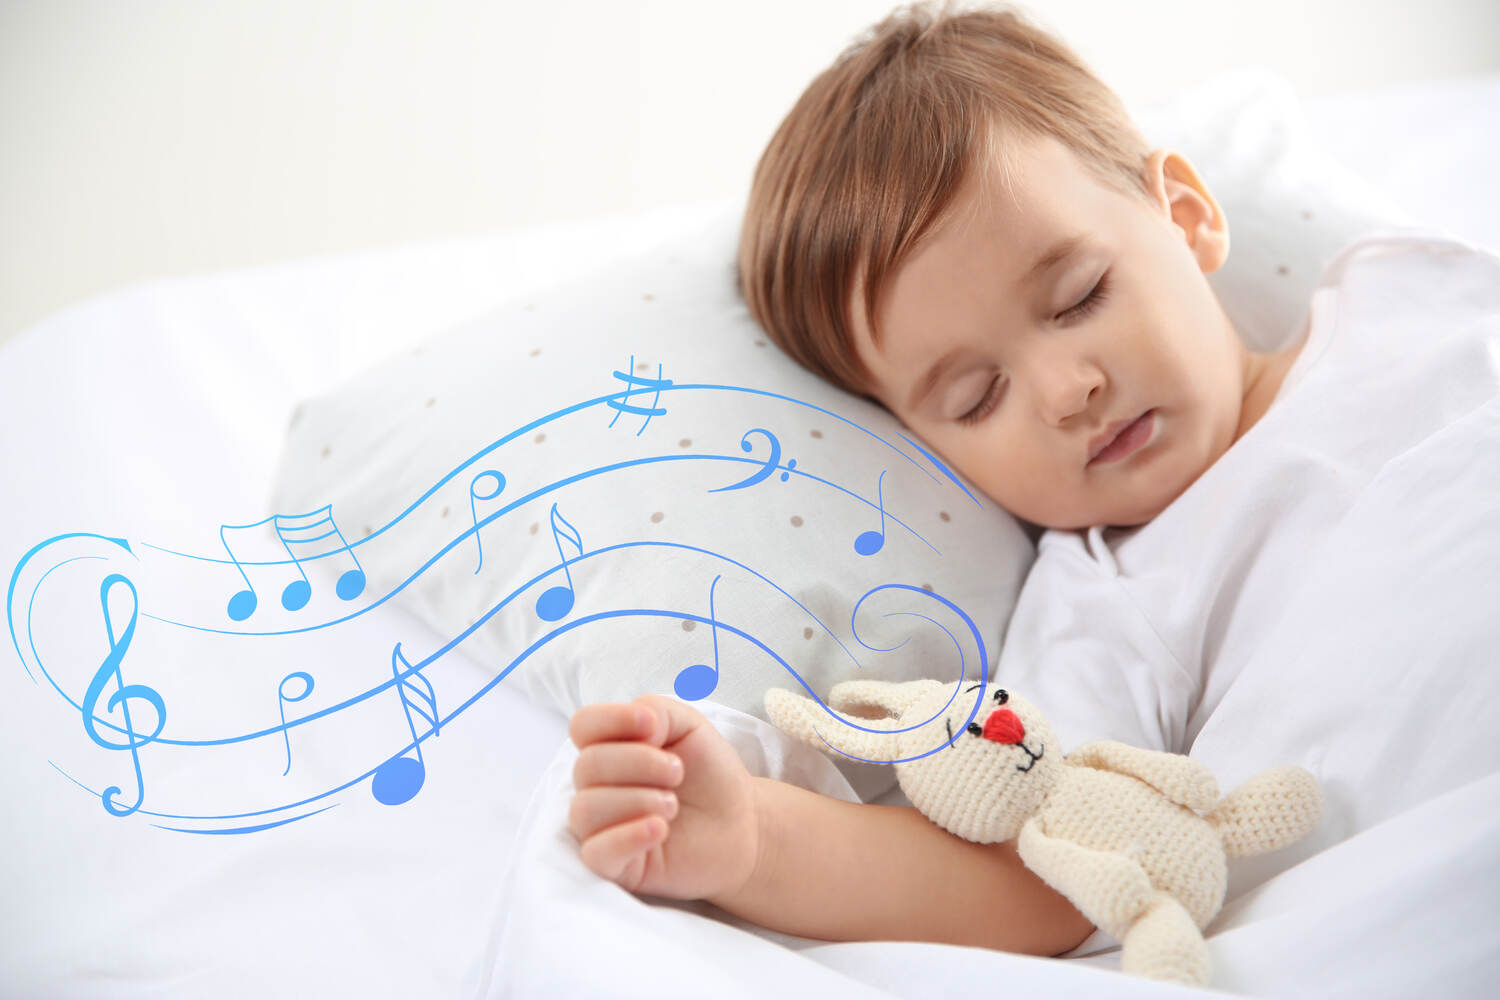 Soothing music at bedtime helps toddlers sleep